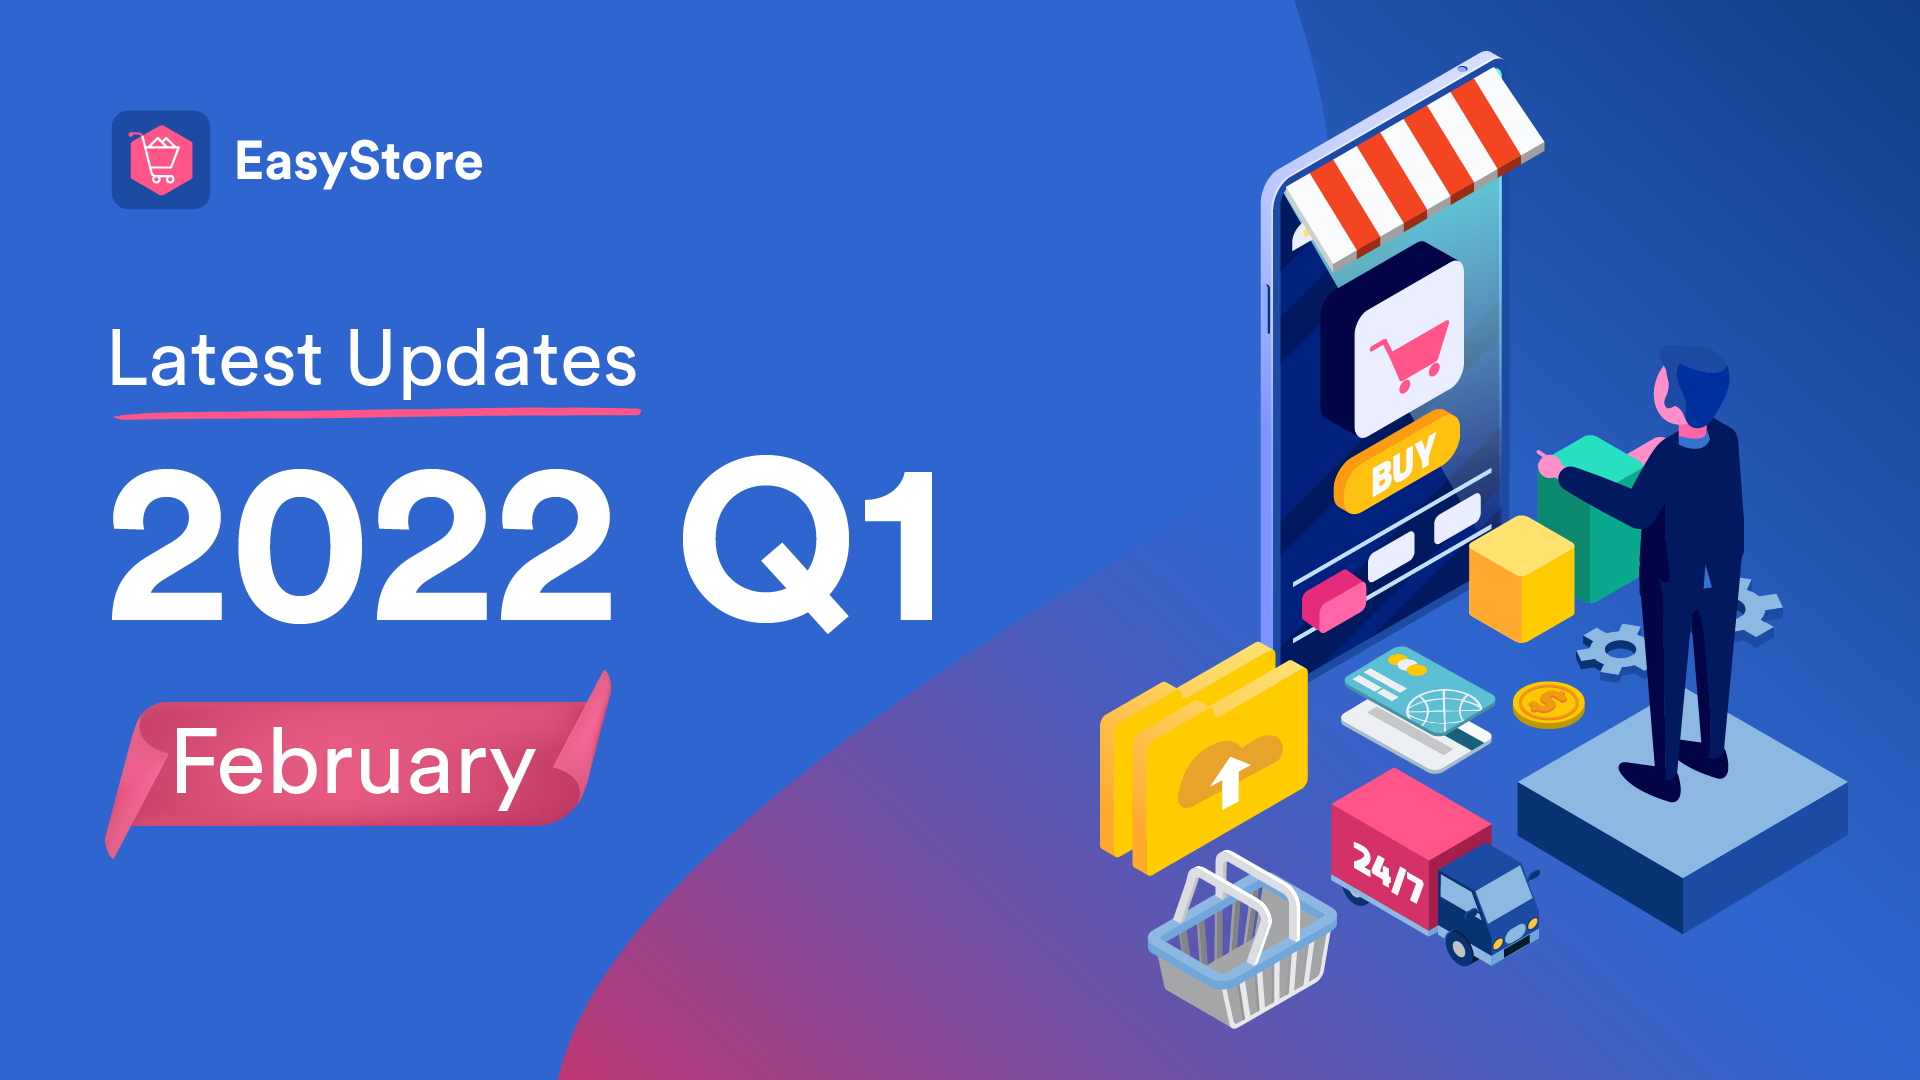 easystore-latest-updates-february-2022